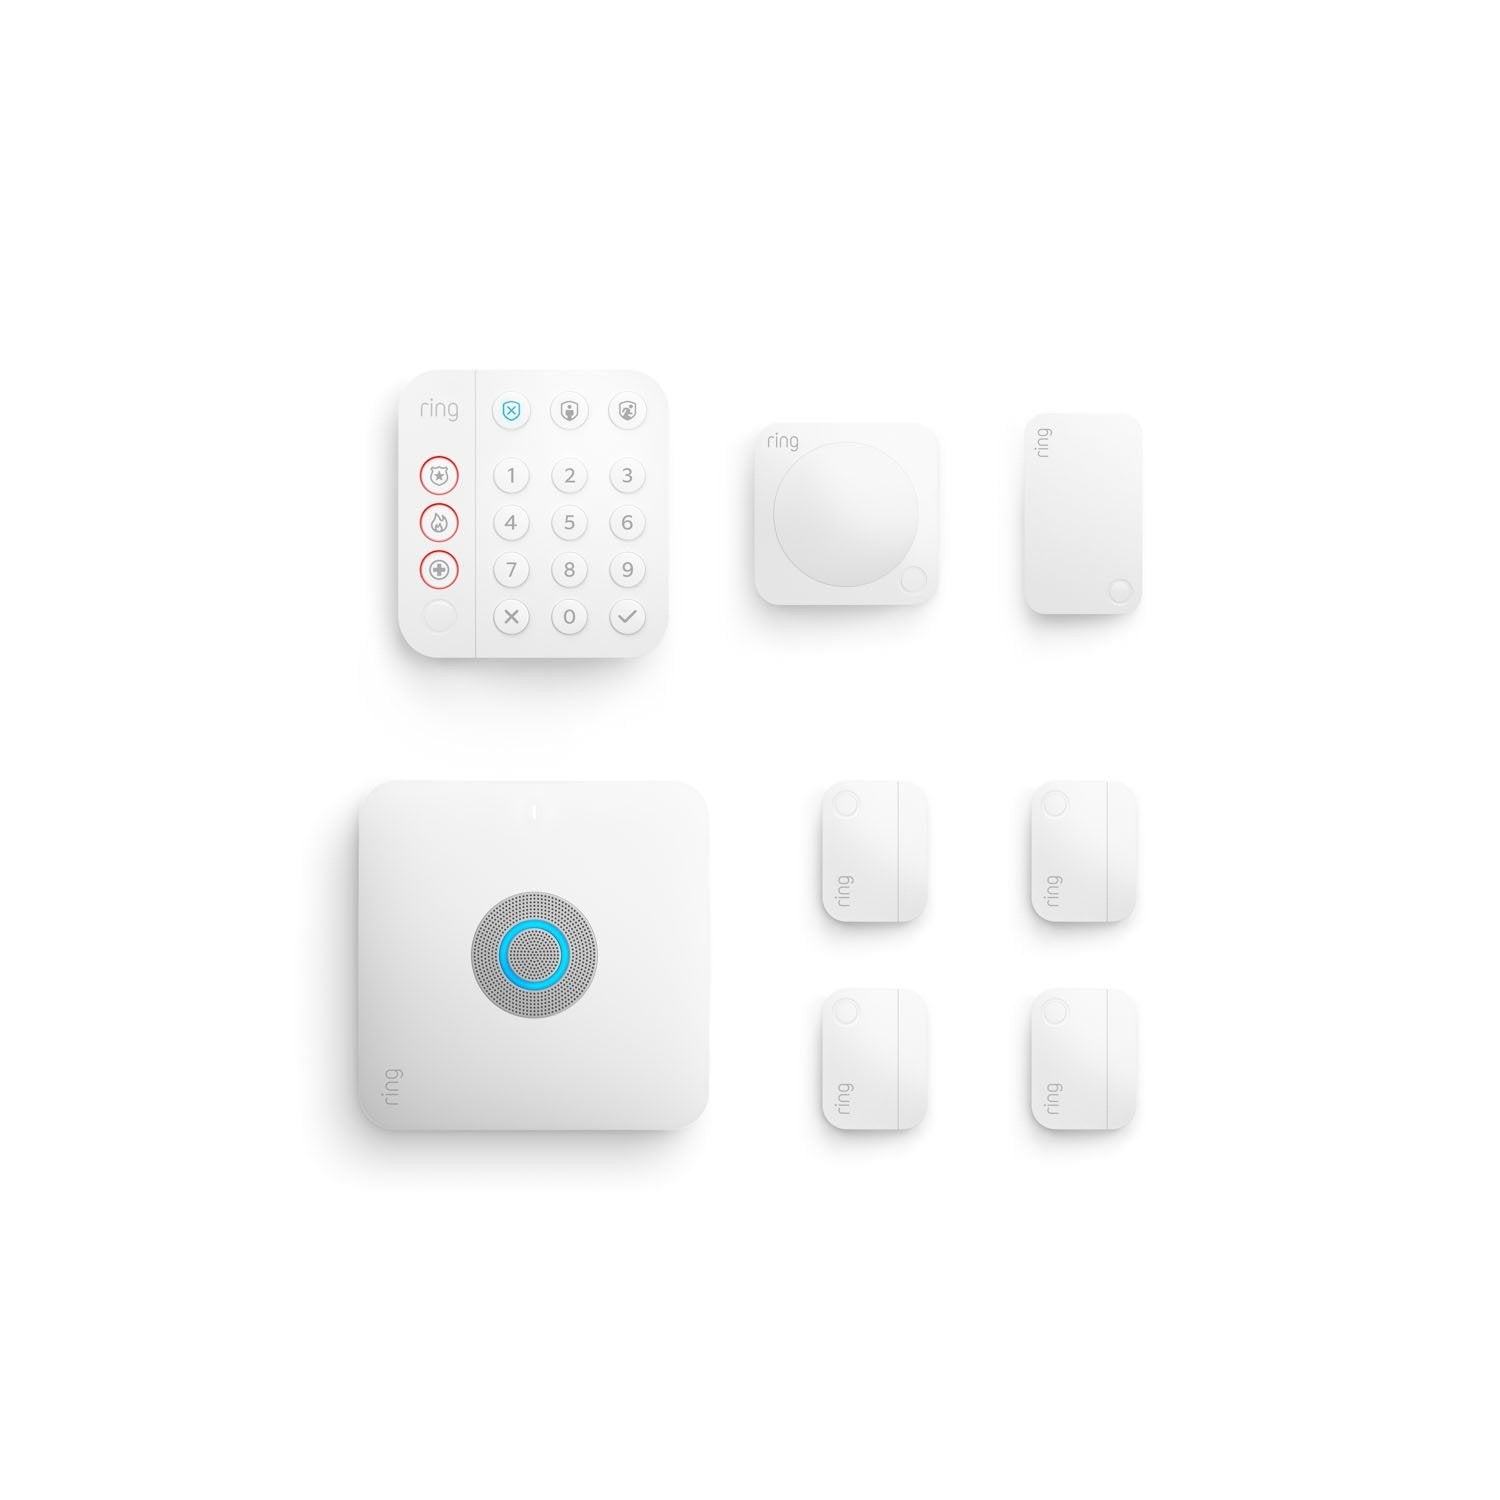 Alarm Pro Security Kit, 8-Piece (with built-in eero Wi-Fi 6 router) - White